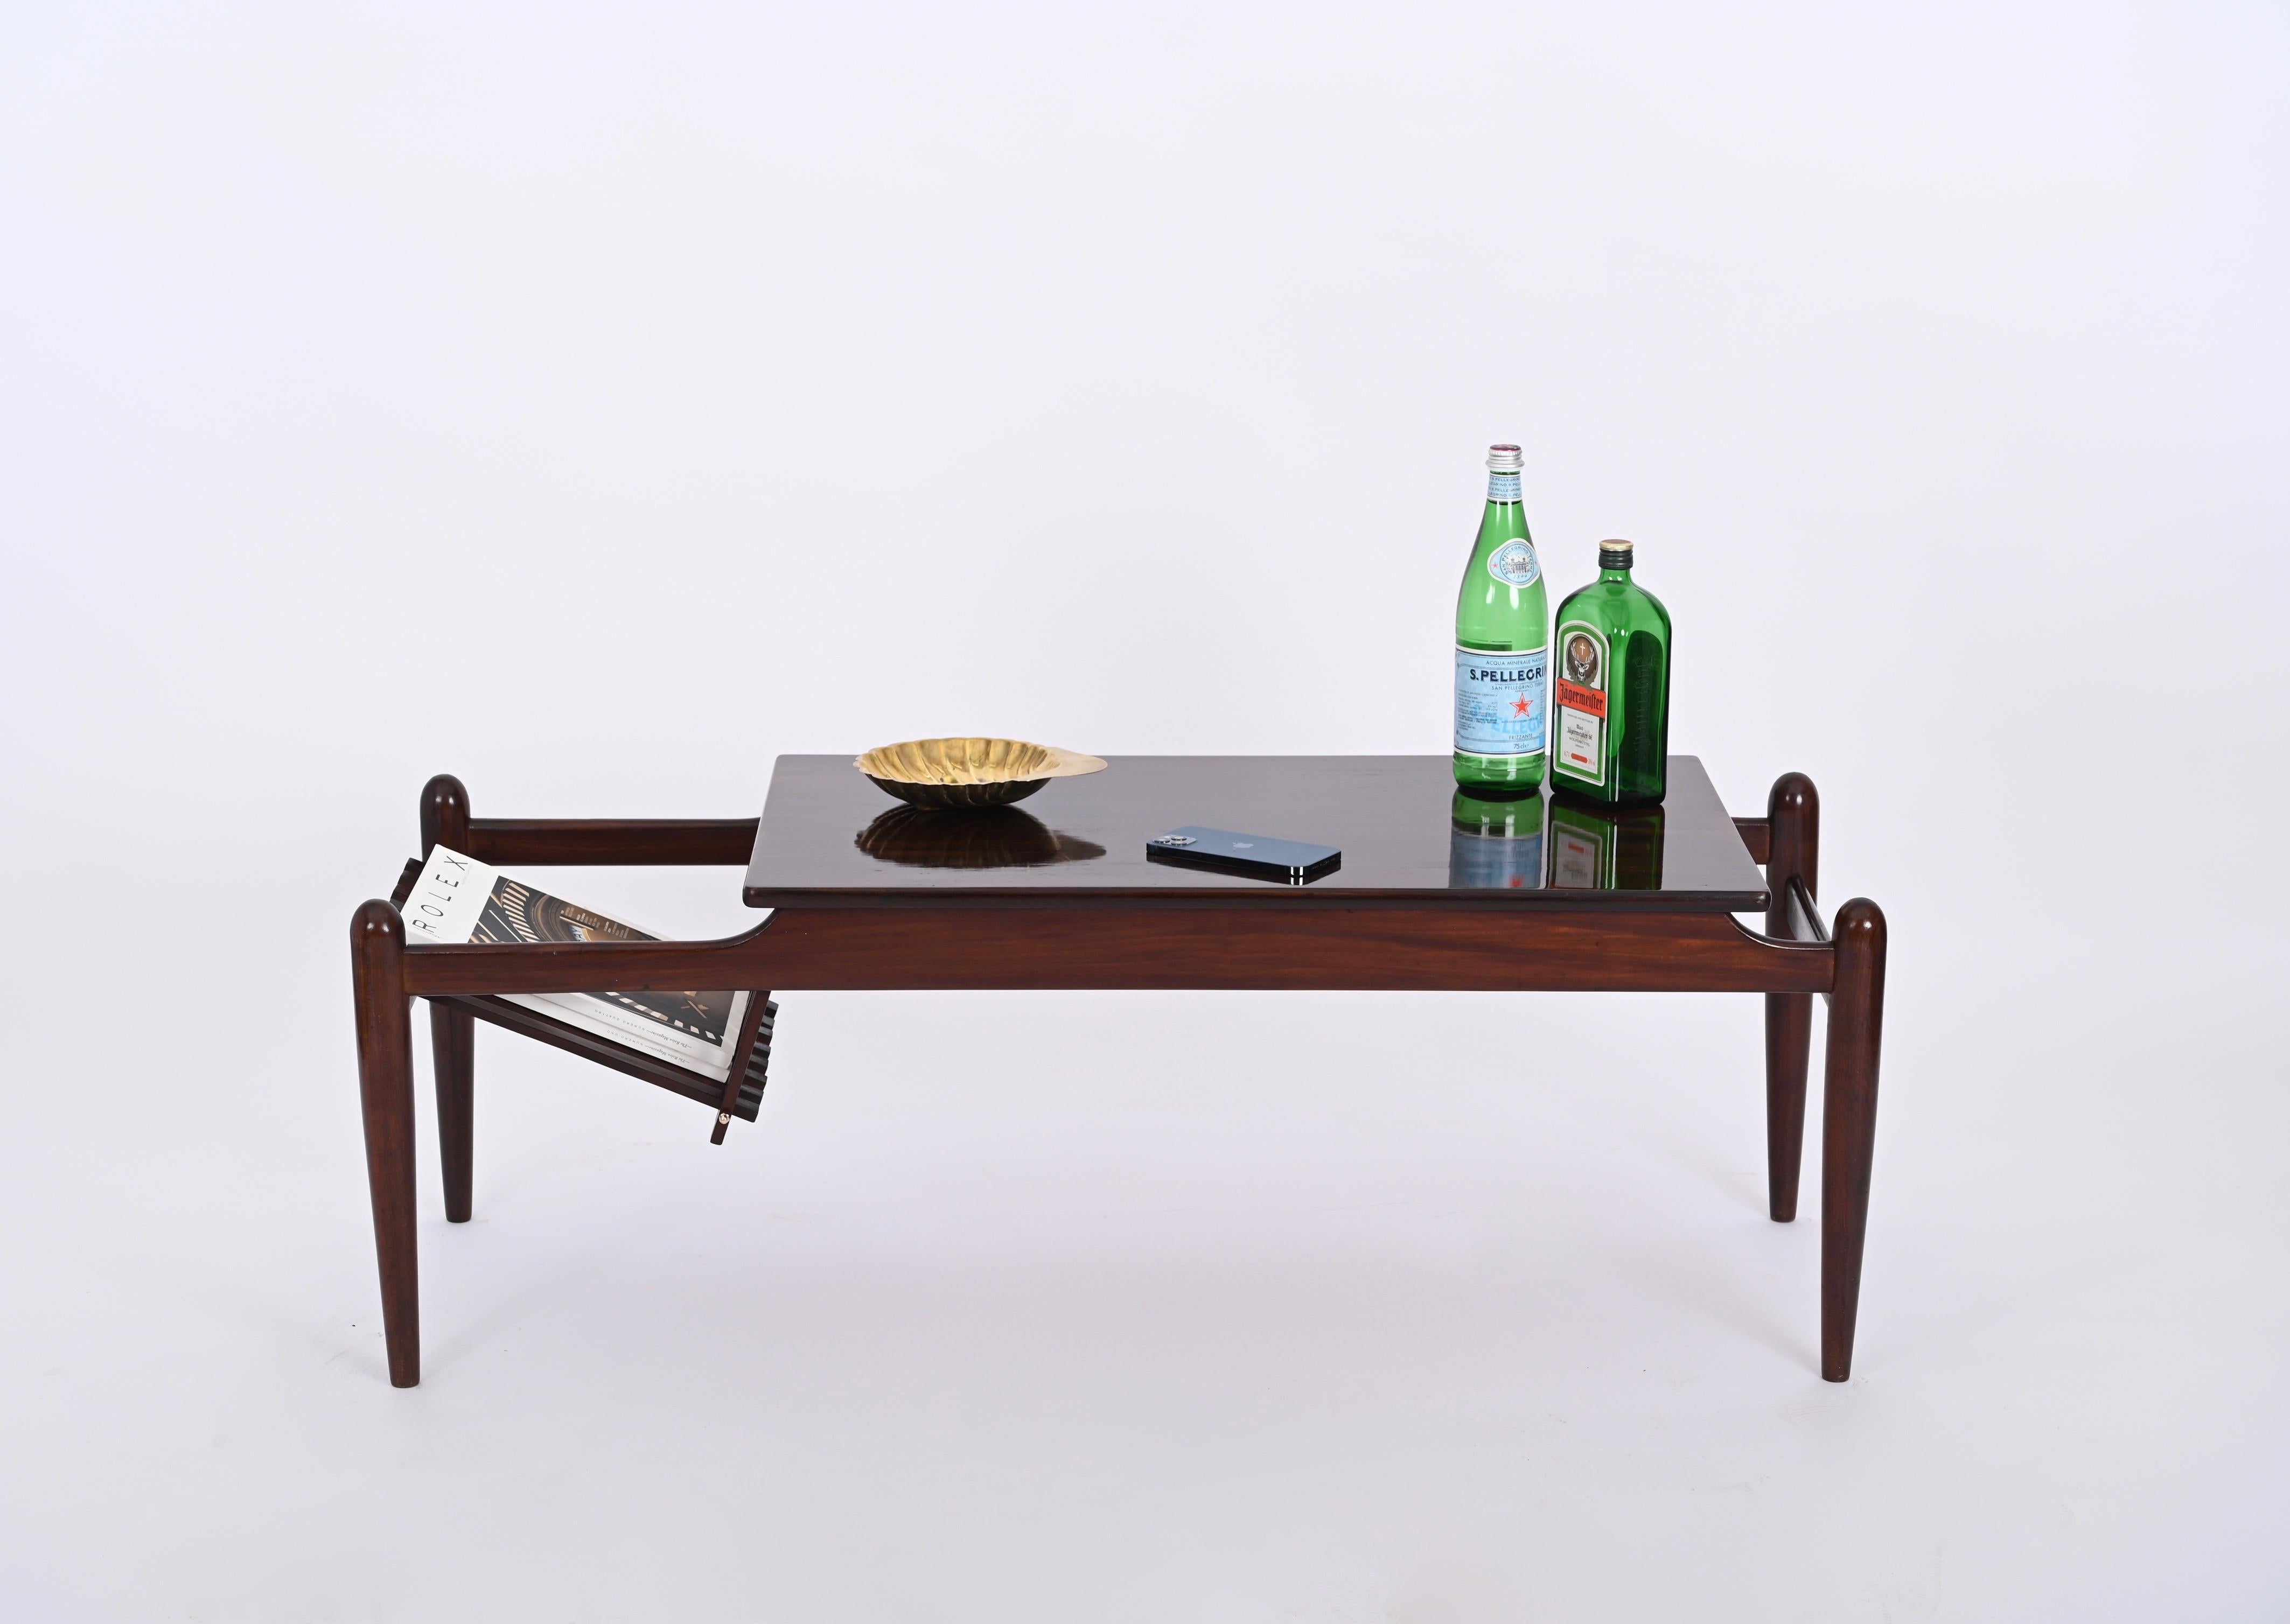 Brass Midcentury Coffee Table with Magazine Rack in Teak Wood, Italy 1960s For Sale